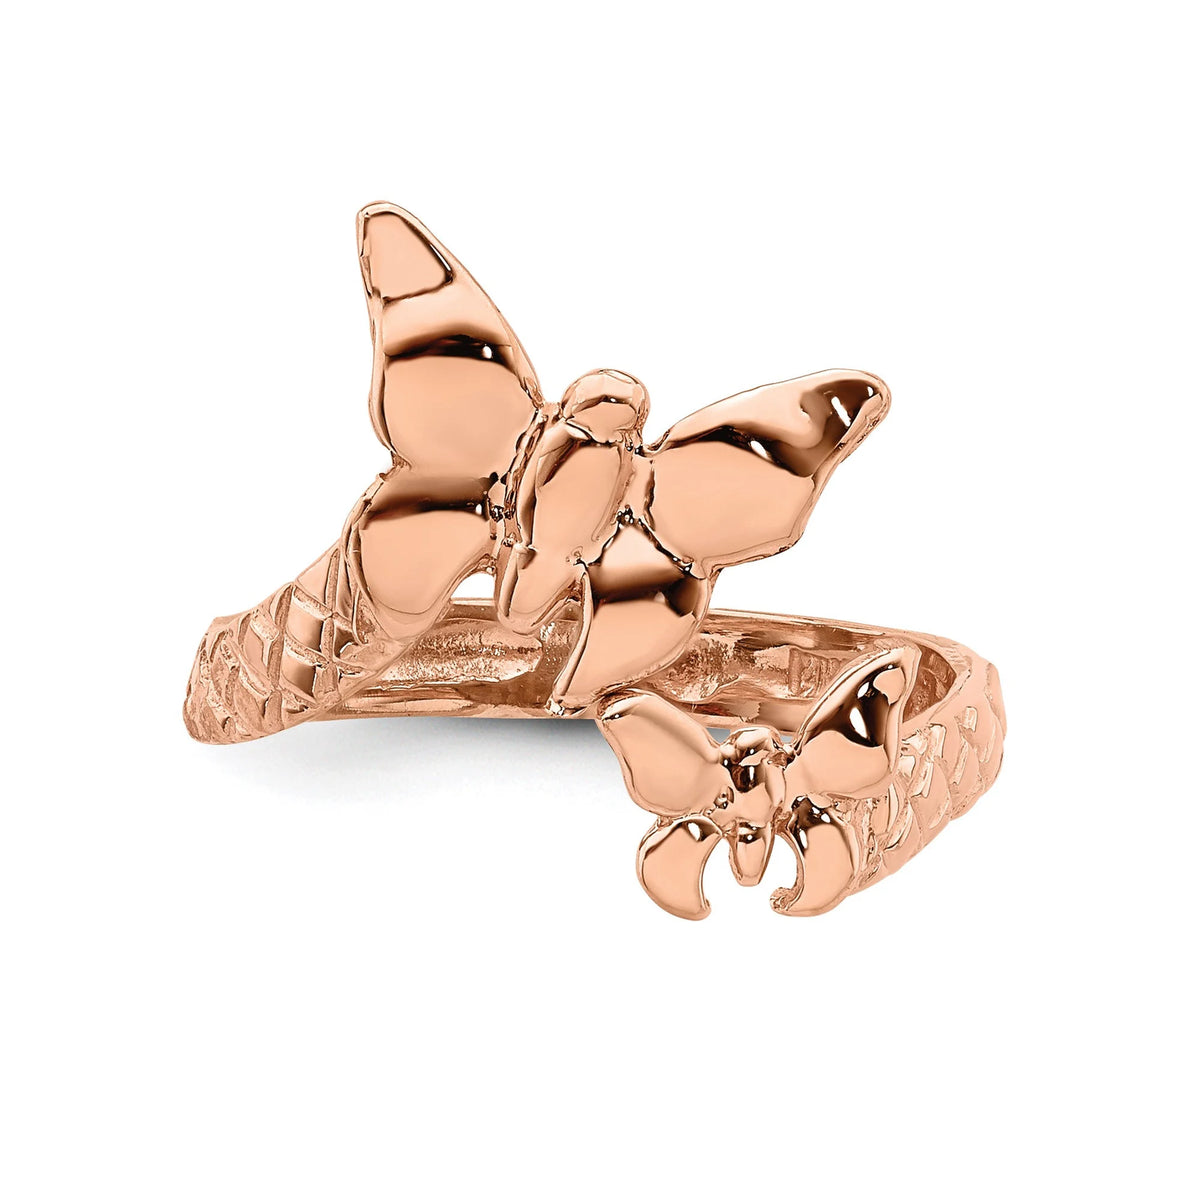 14k Yellow Gold or 14k Rose Gold Butterflies Toe Ring 4mm Band- Gift Box Included - Made in USA - Butterfly Toe Ring